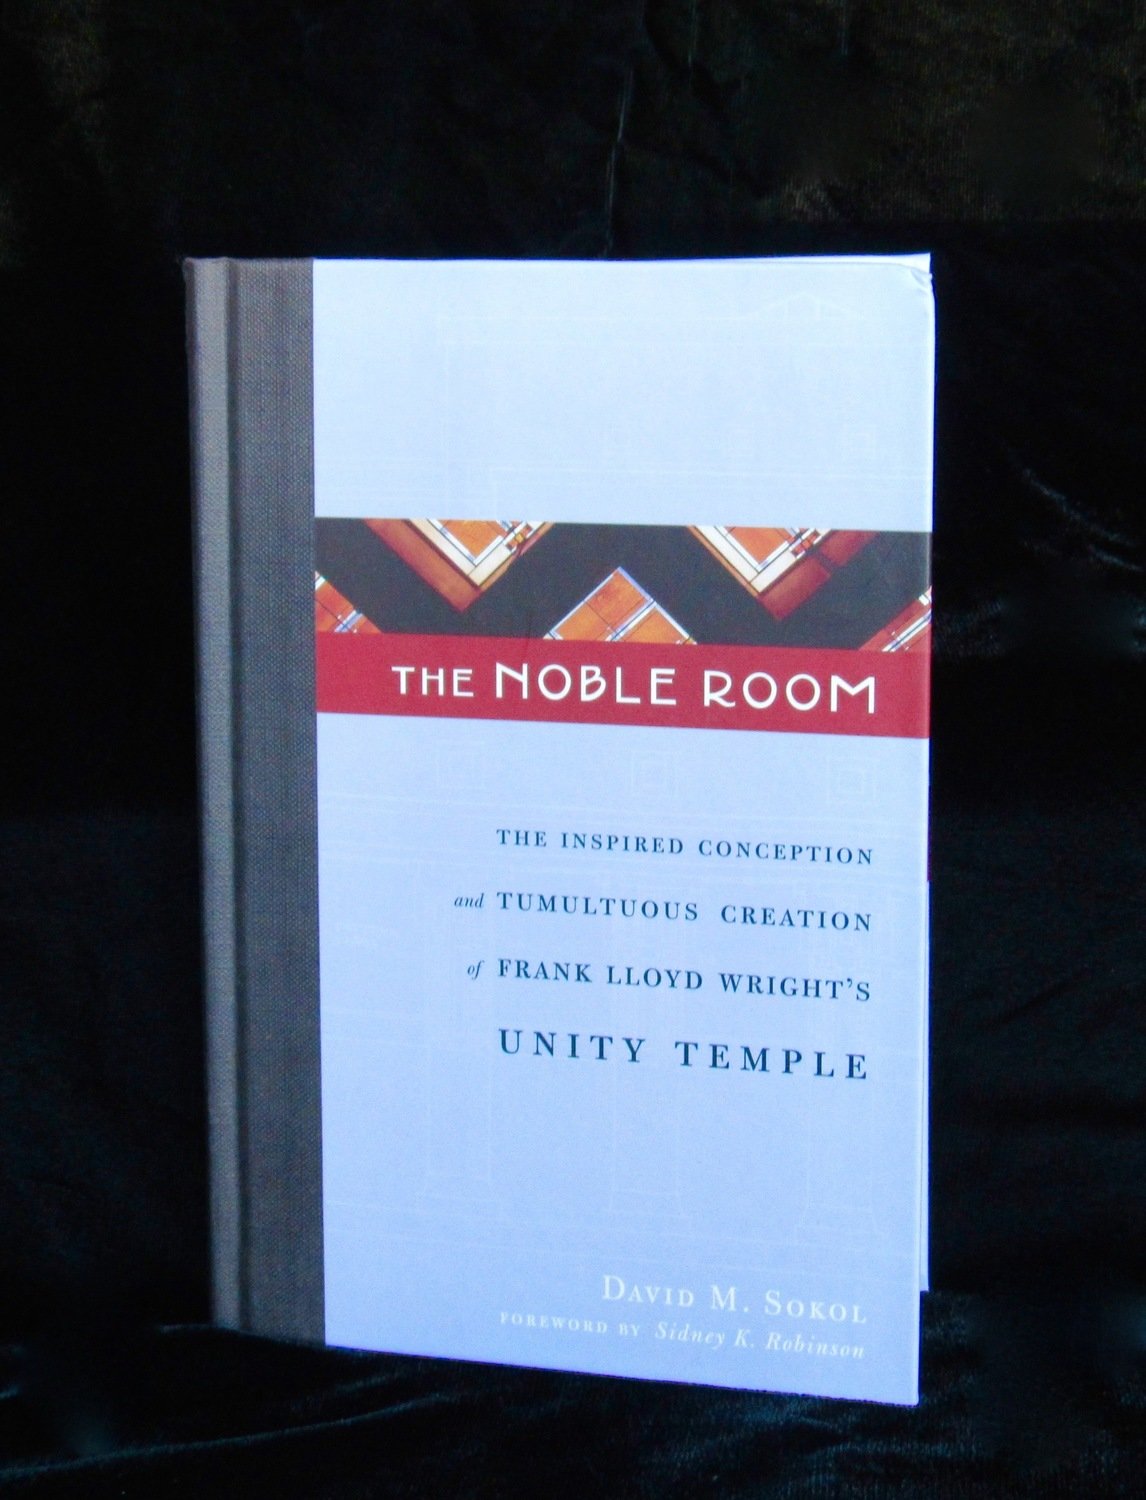 The Noble Room